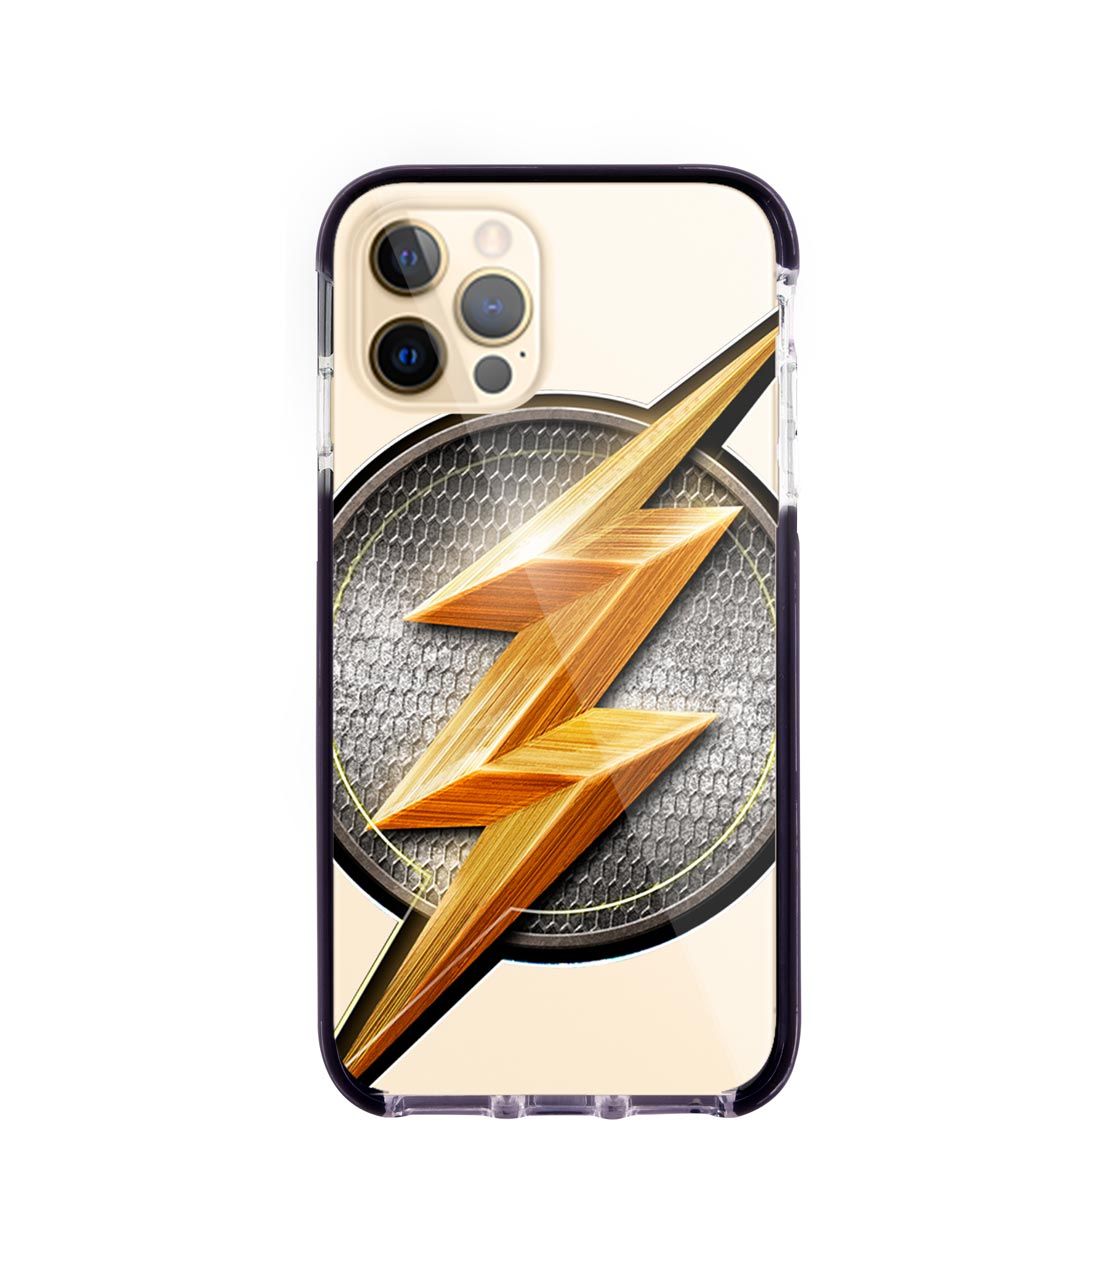 Flash Storm - Extreme Case for iPhone 12 Pro Max